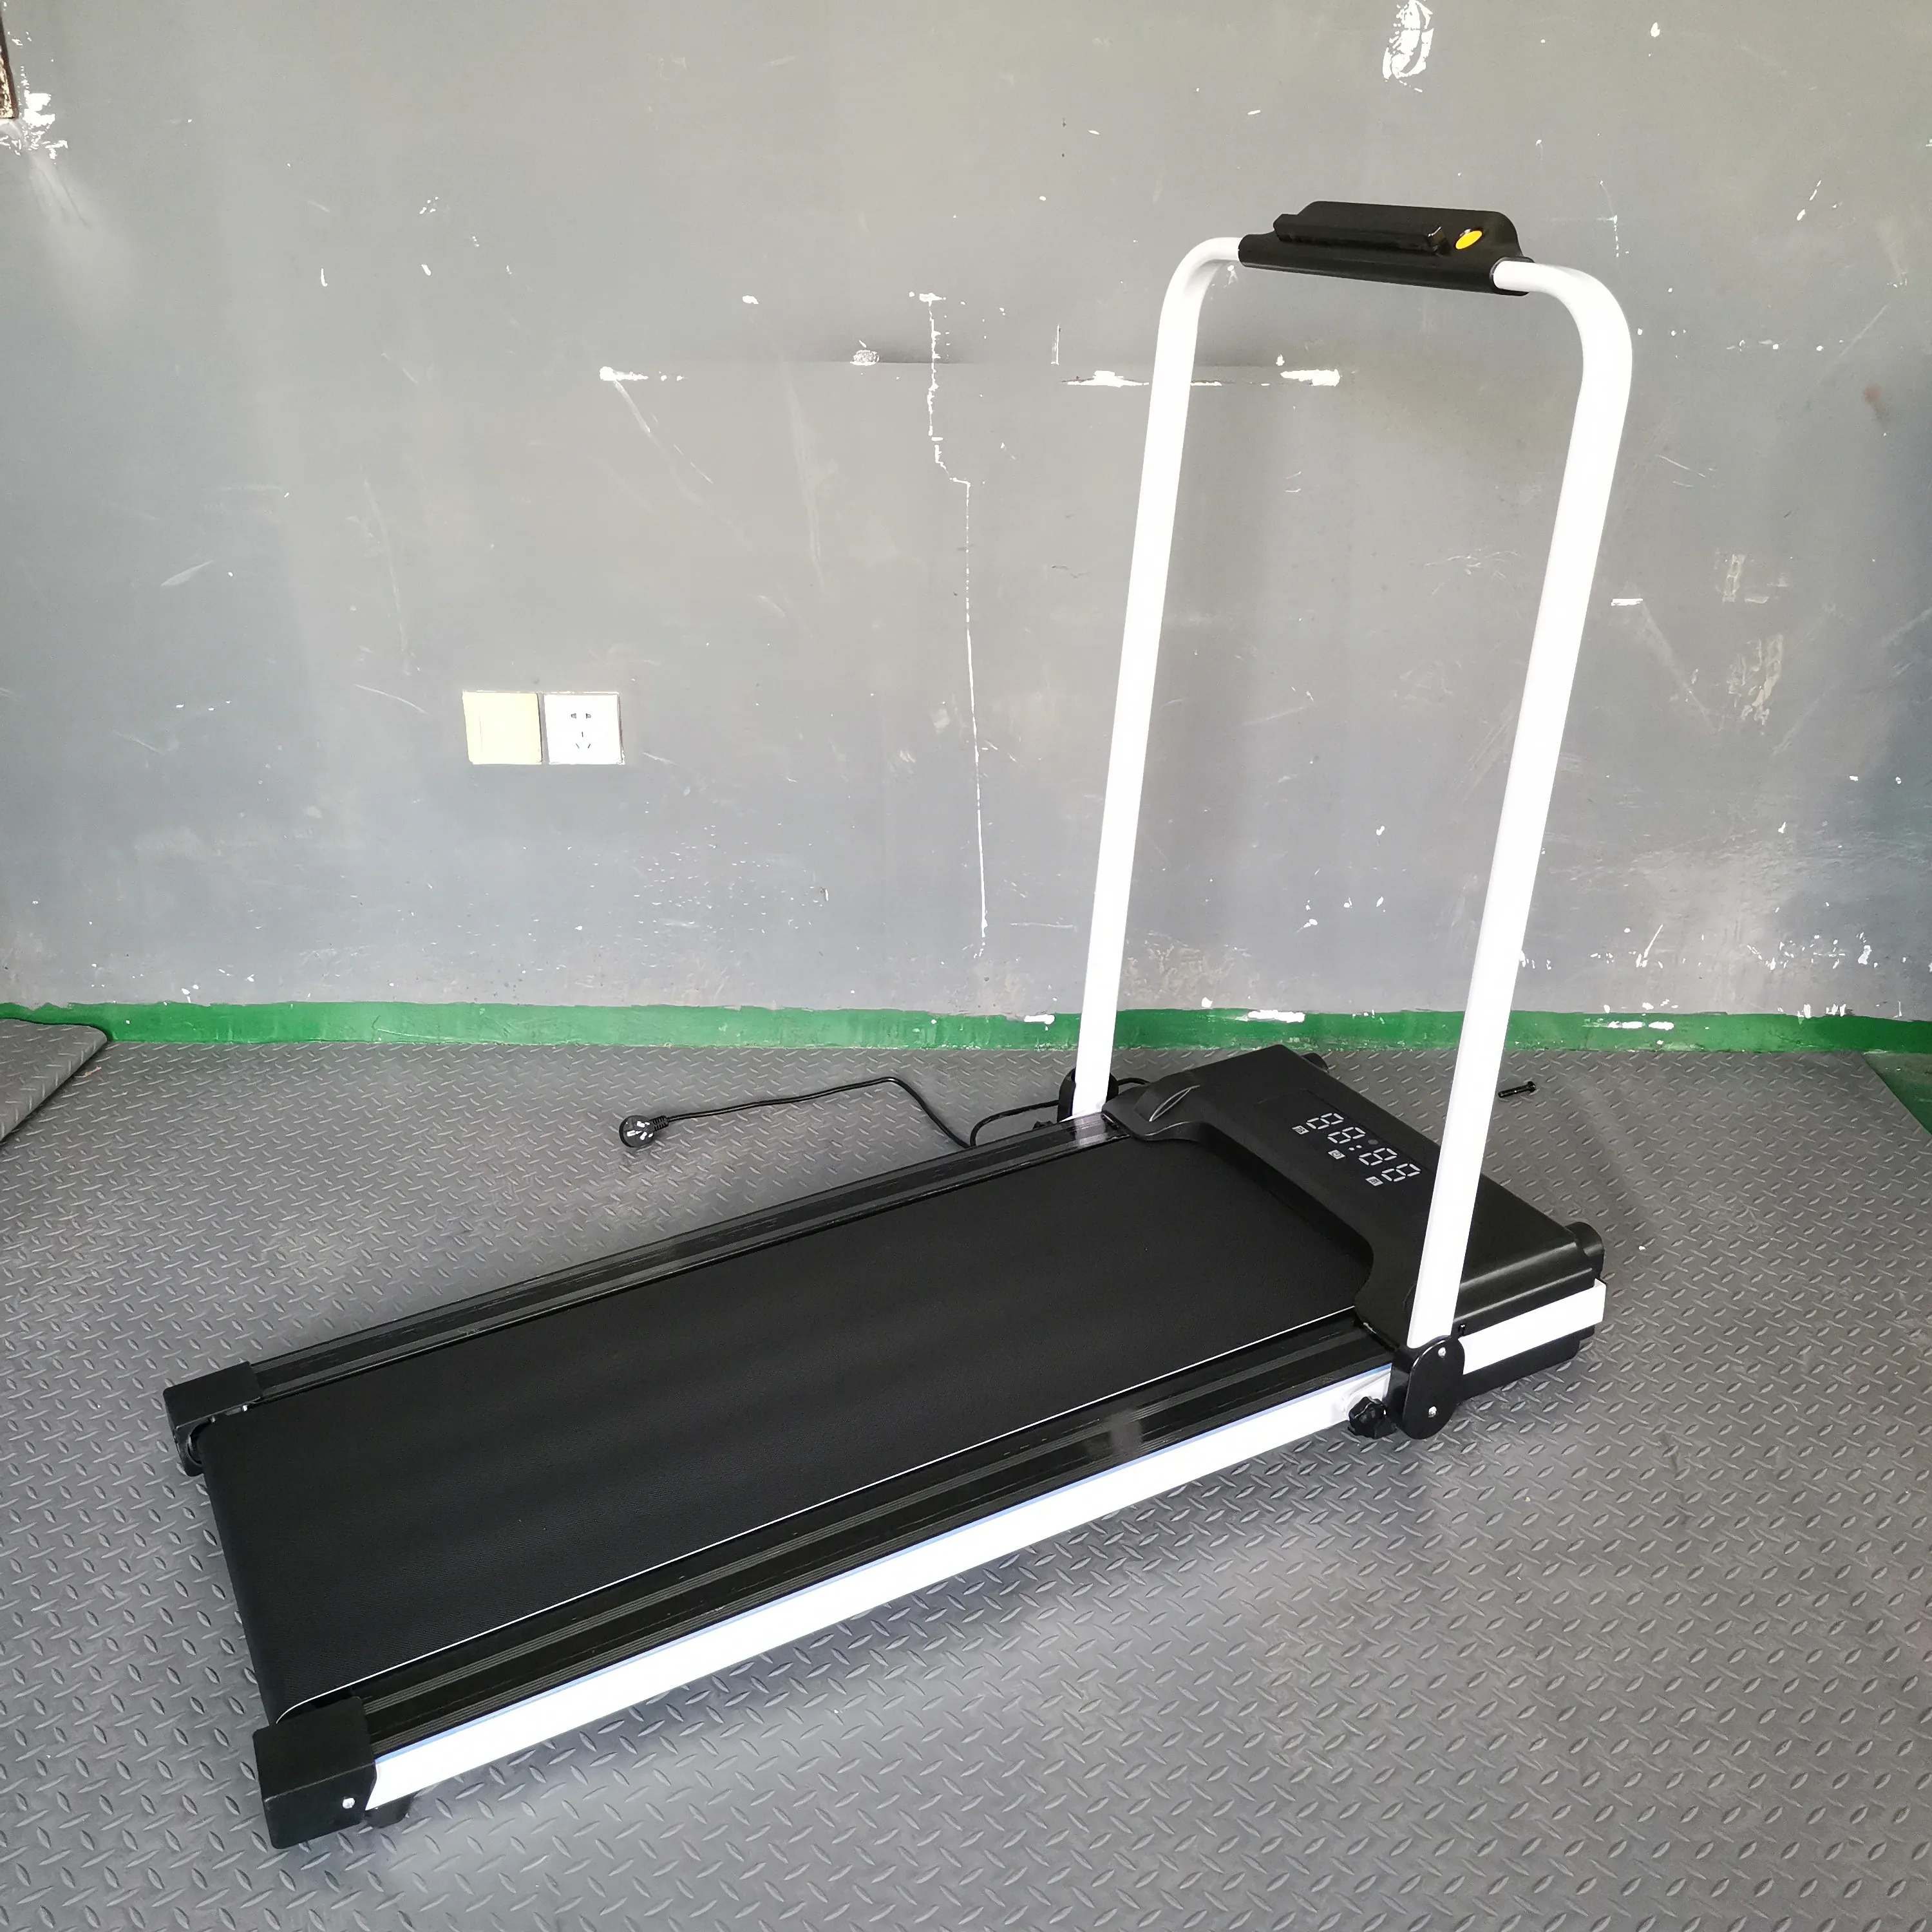 JIT Manufacturers Selling Home Curved Treadmill Folding Treadmill Fitness Equipment Exercise Running Machine